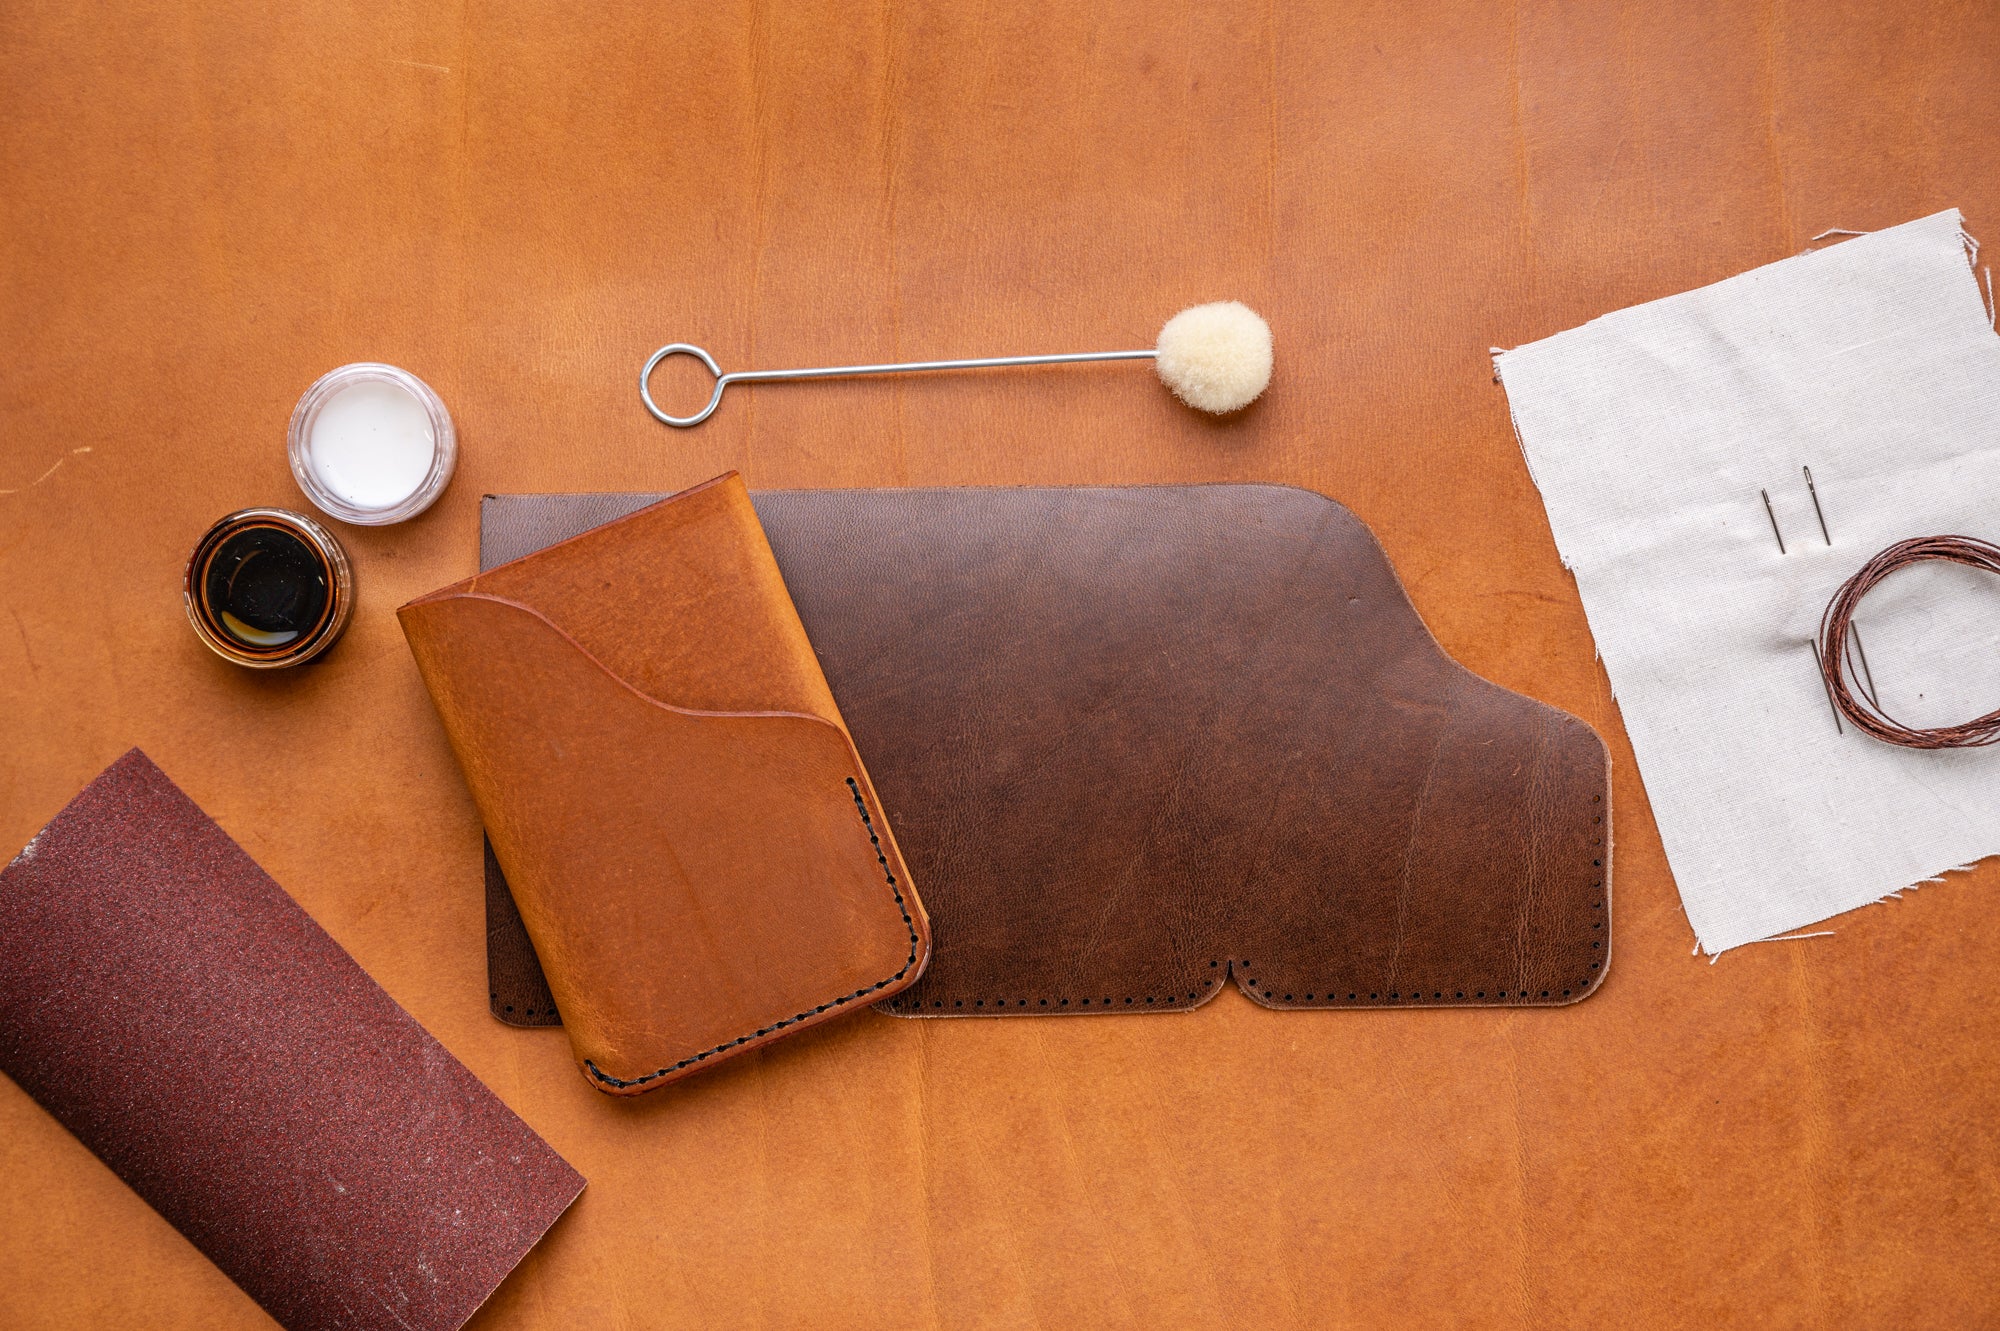 Leather Working & Craft: Main Techniques And Tools - BuyLeatherOnline